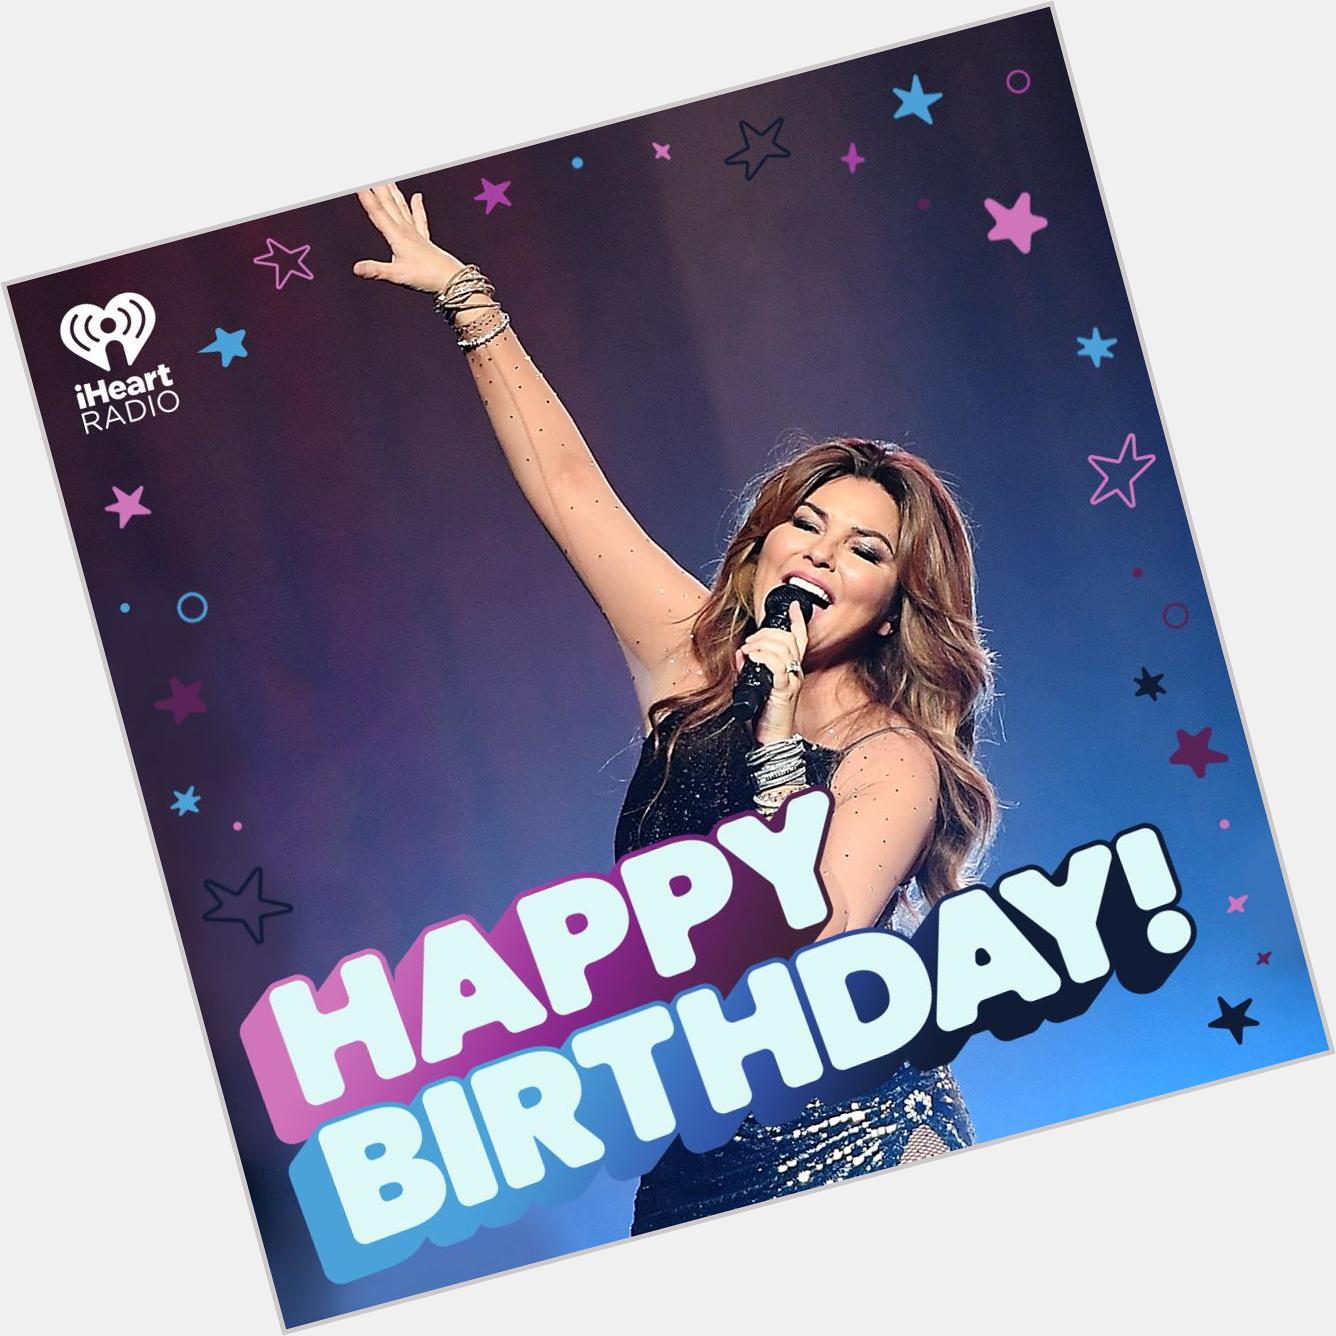 It can only go UP From here!  Happy Birthday Shania Twain!  